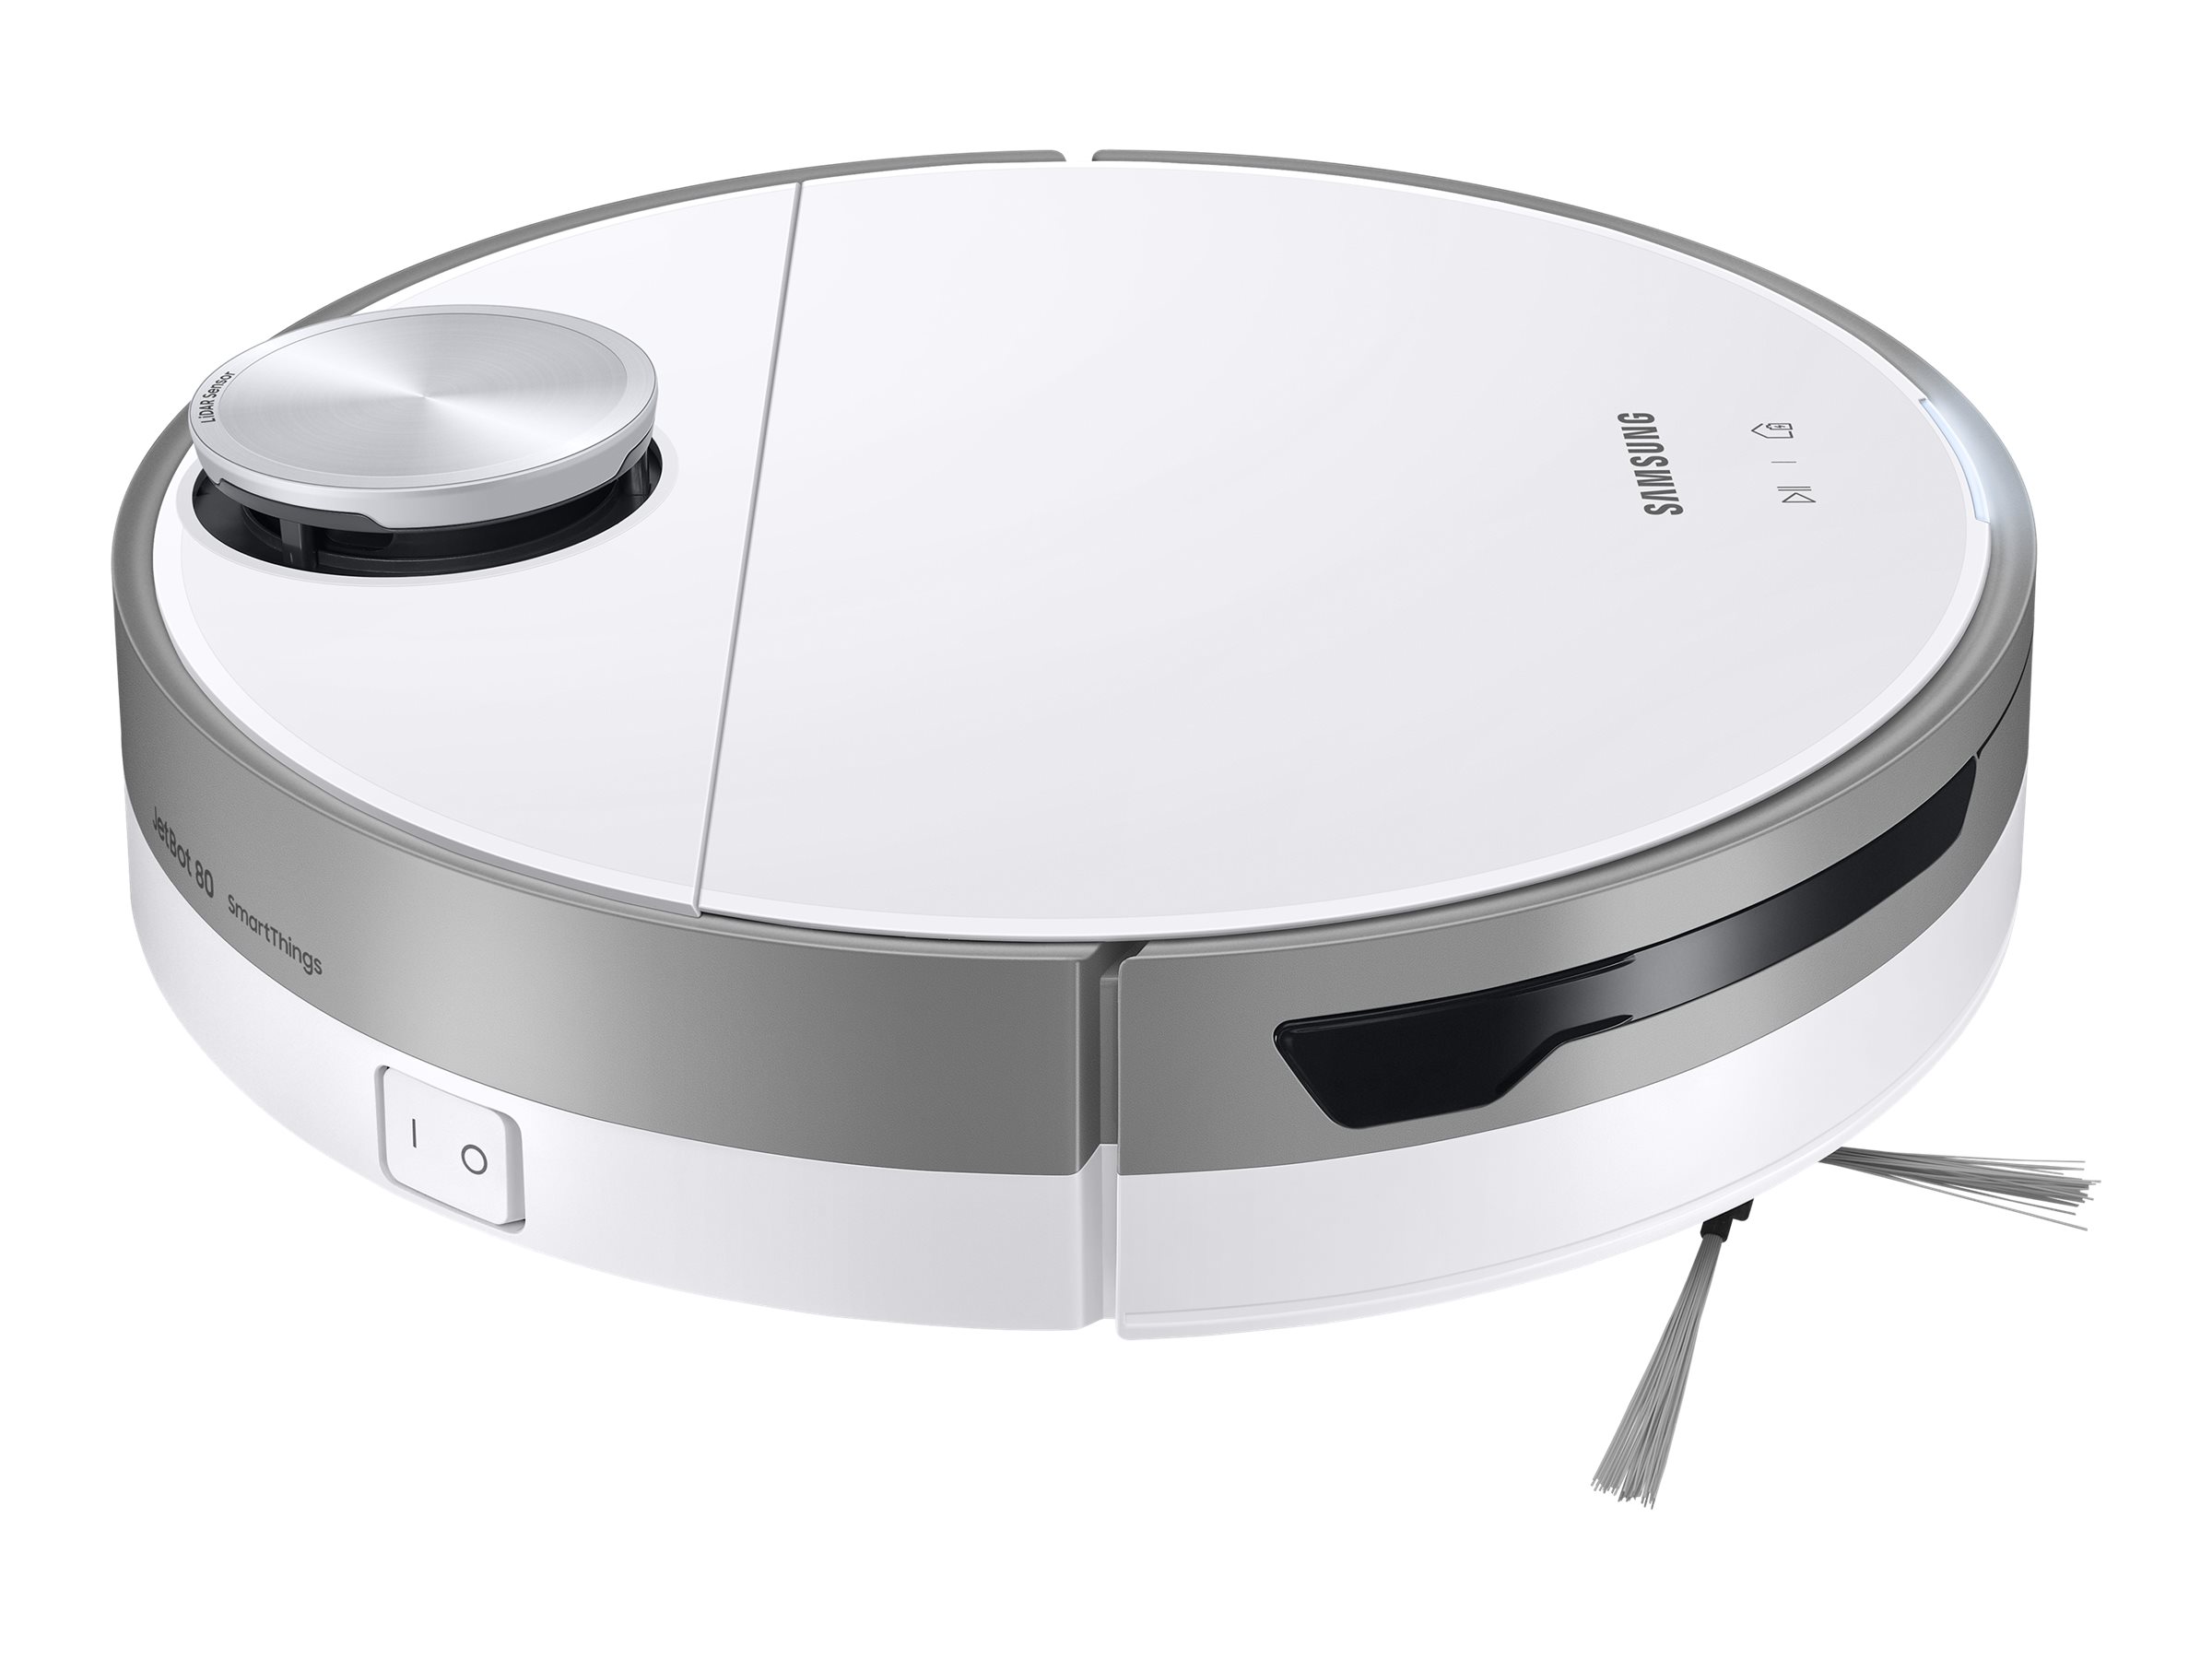 SAMSUNG Jet Bot Robot Vacuum with Intelligent Power Control - image 3 of 8